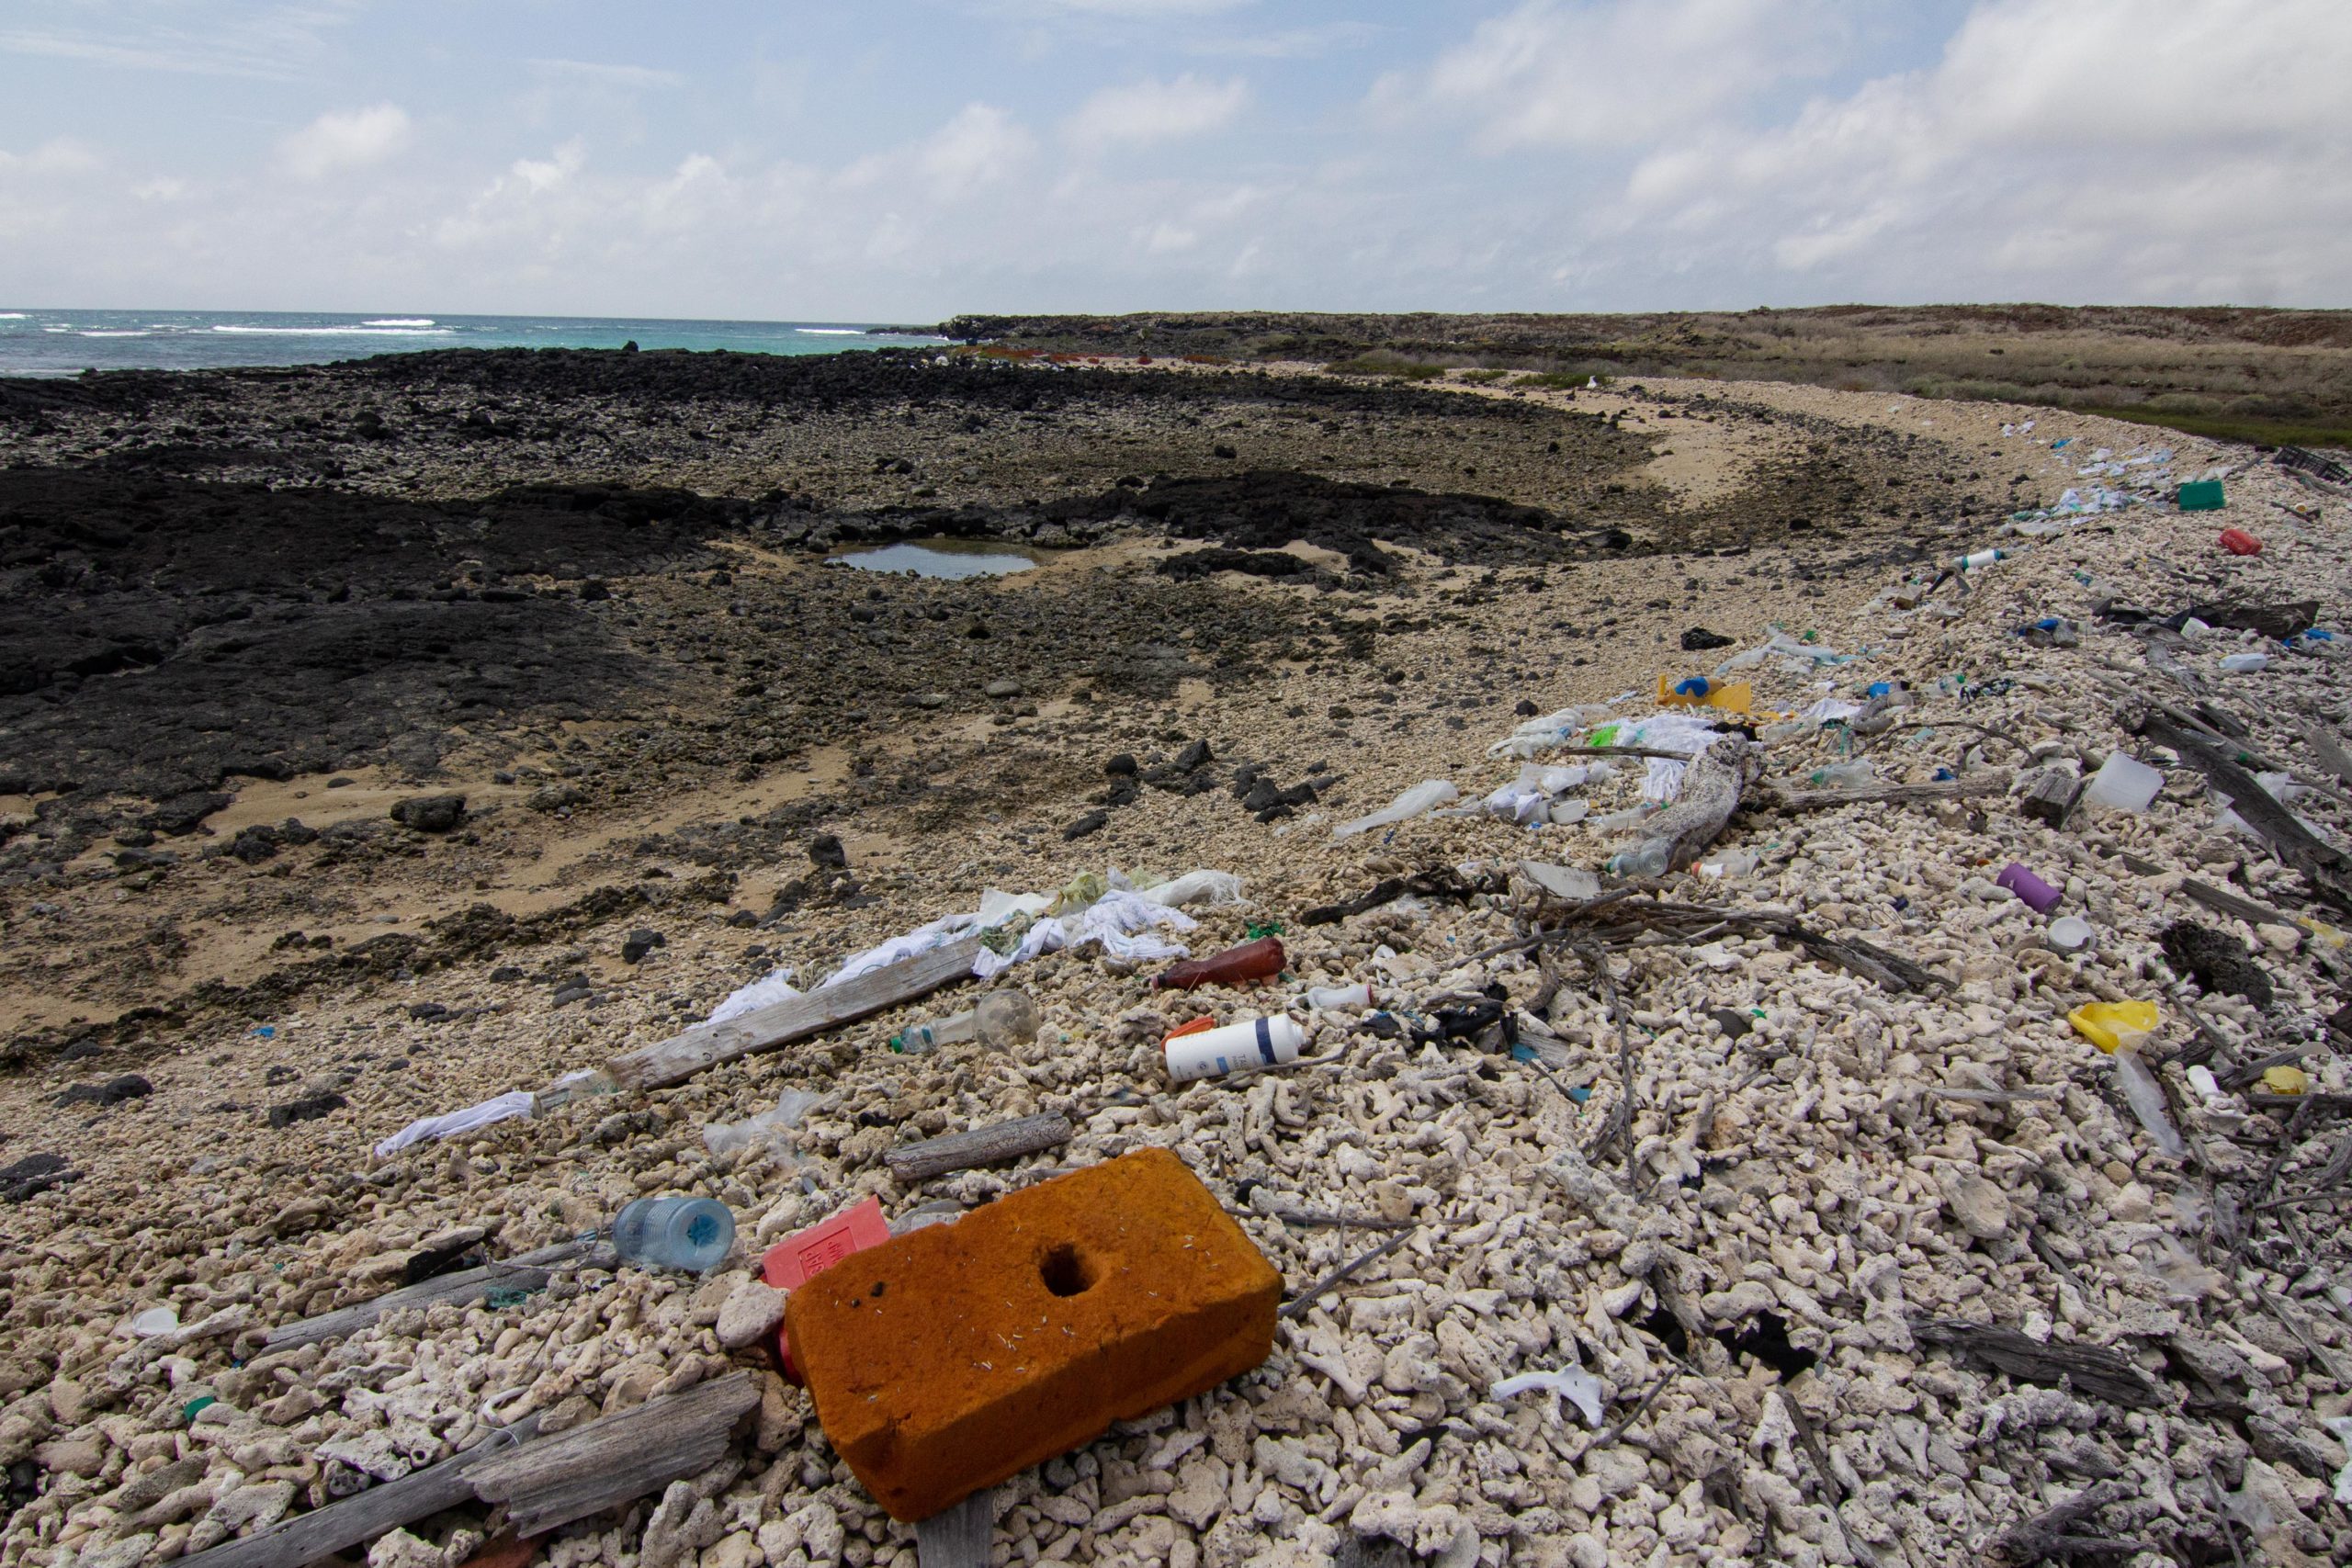 Plastic litter in the Galapagos